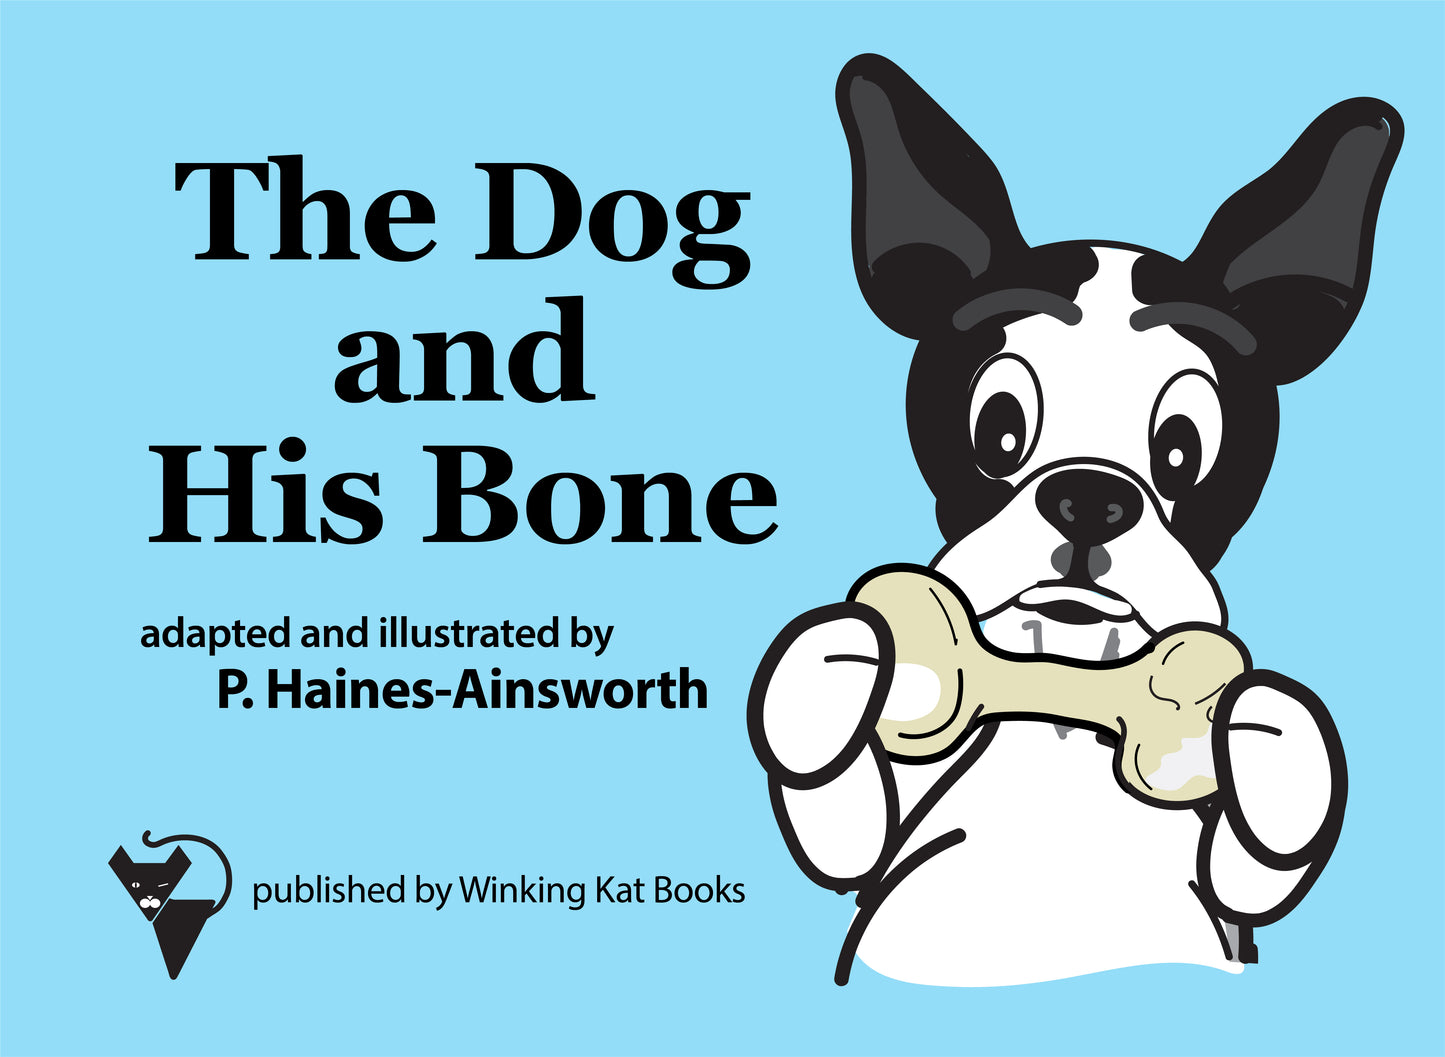 The Dog and His Bone